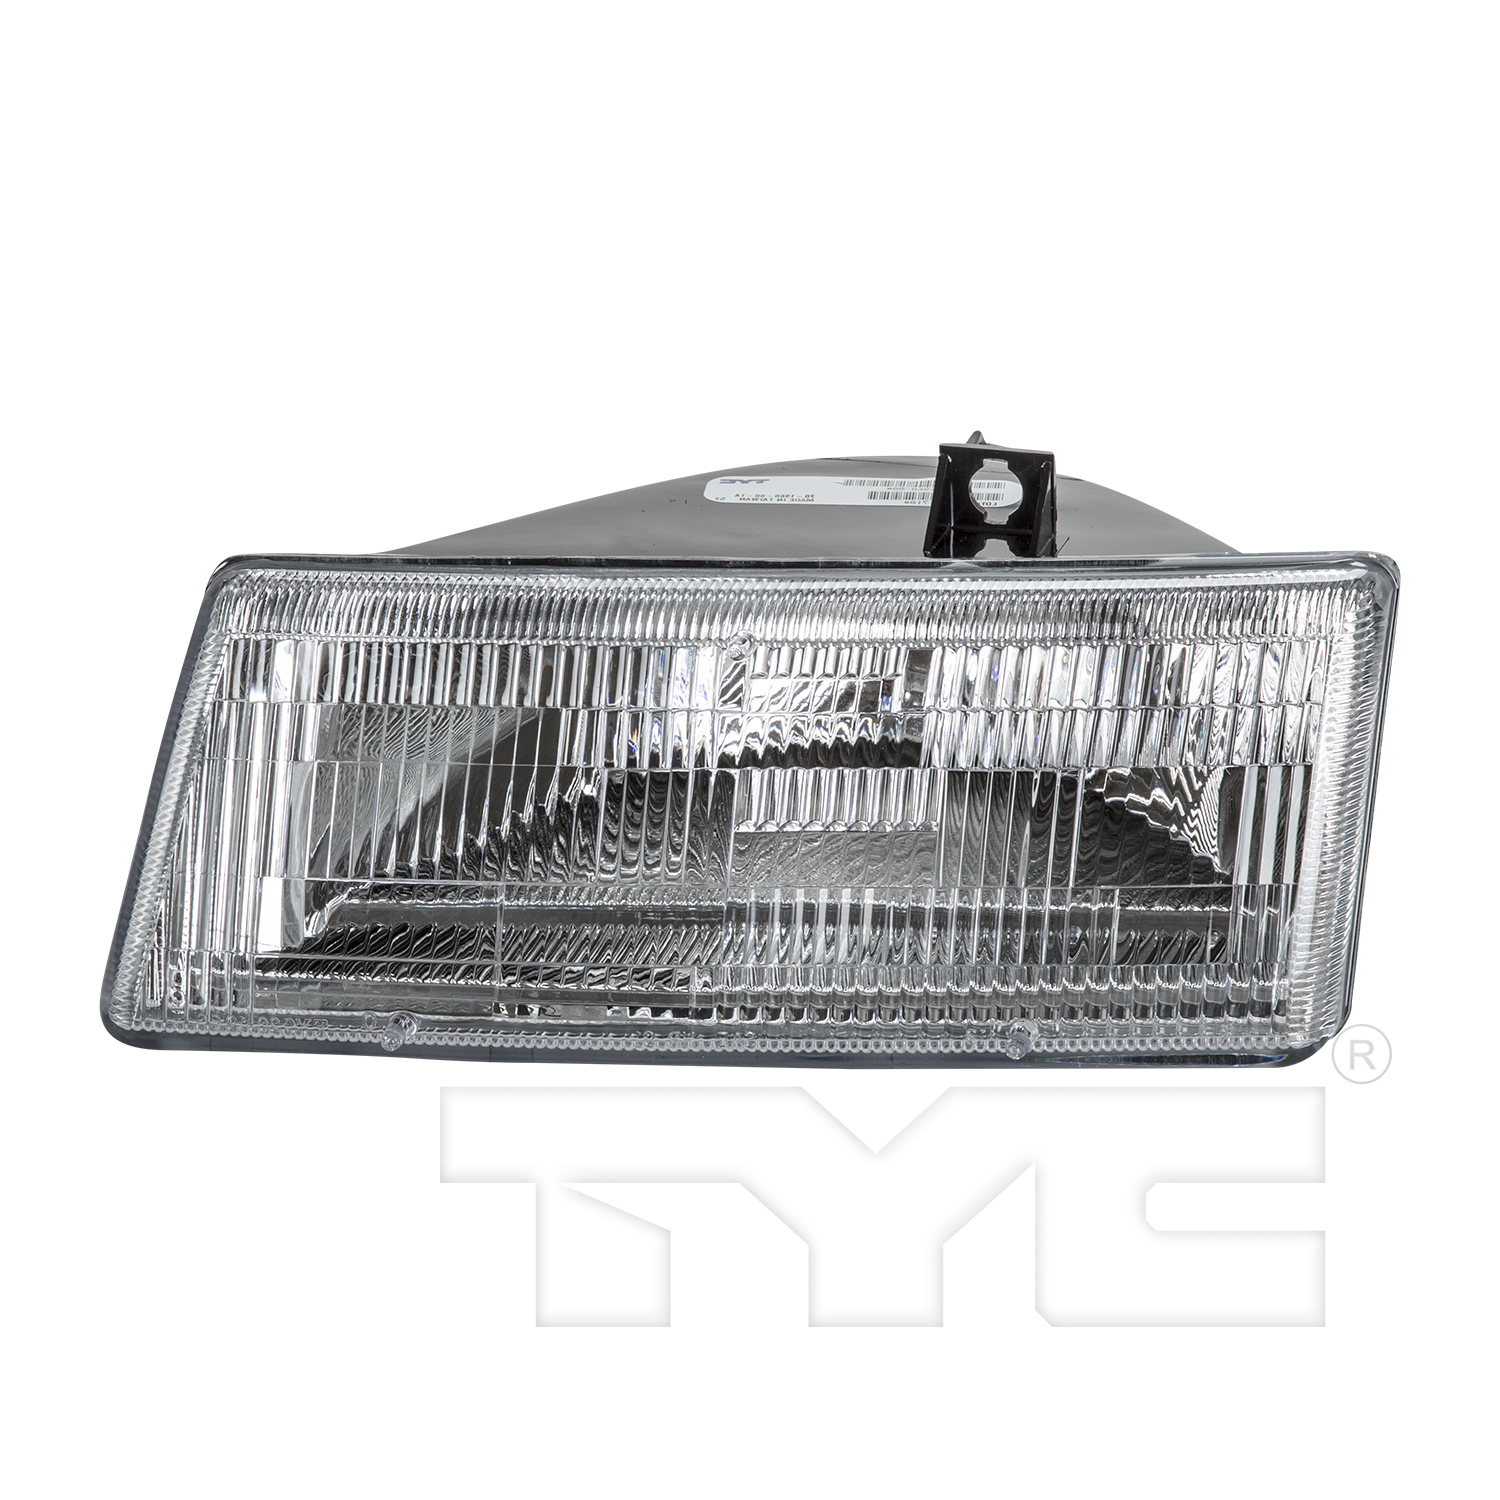 Aftermarket HEADLIGHTS for PLYMOUTH - VOYAGER, VOYAGER,91-95,LT Headlamp lens/housing